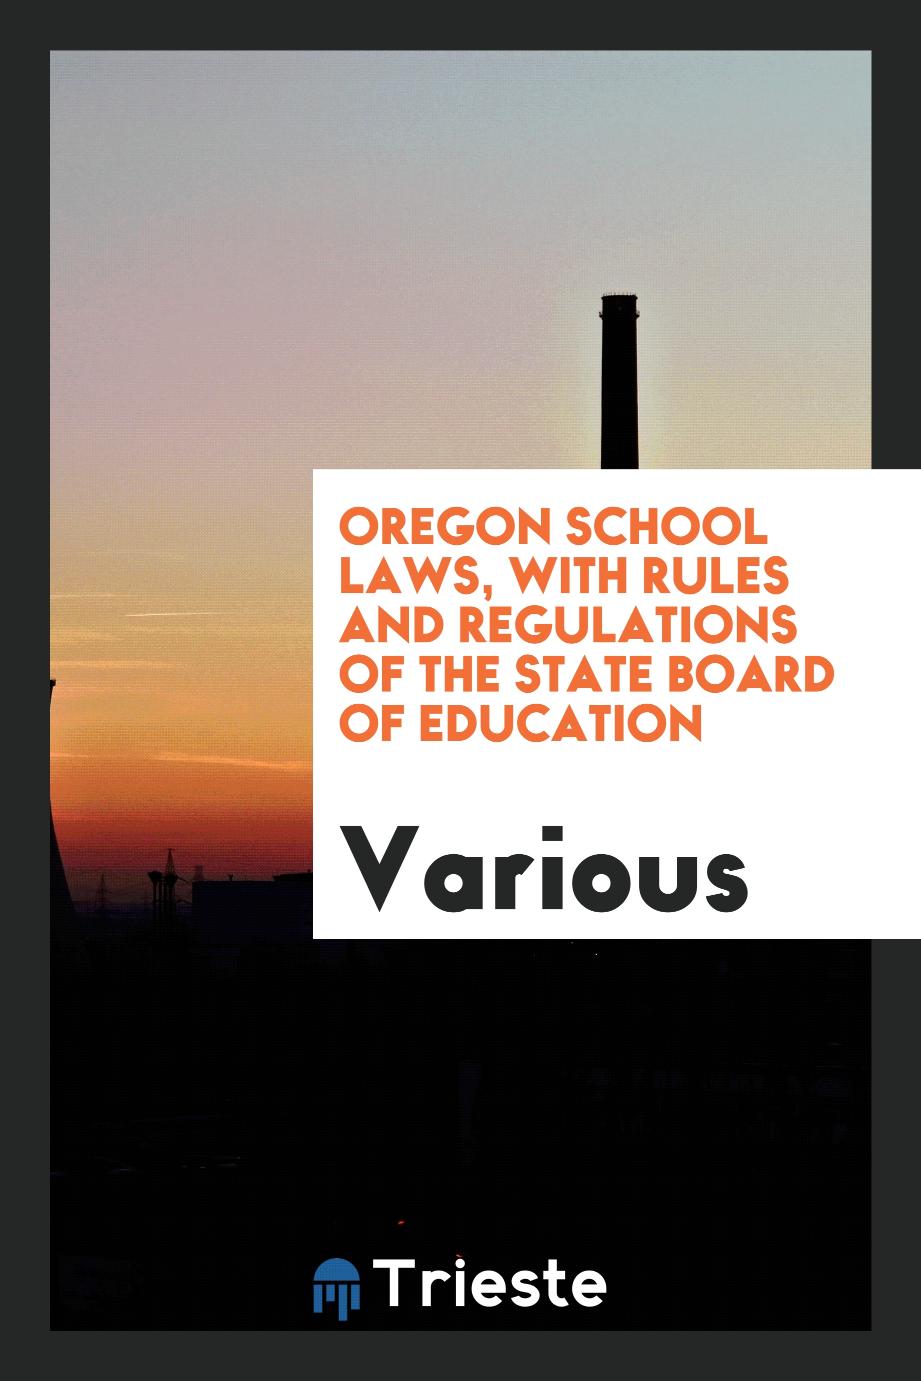 Oregon school laws, with rules and regulations of the state board of education